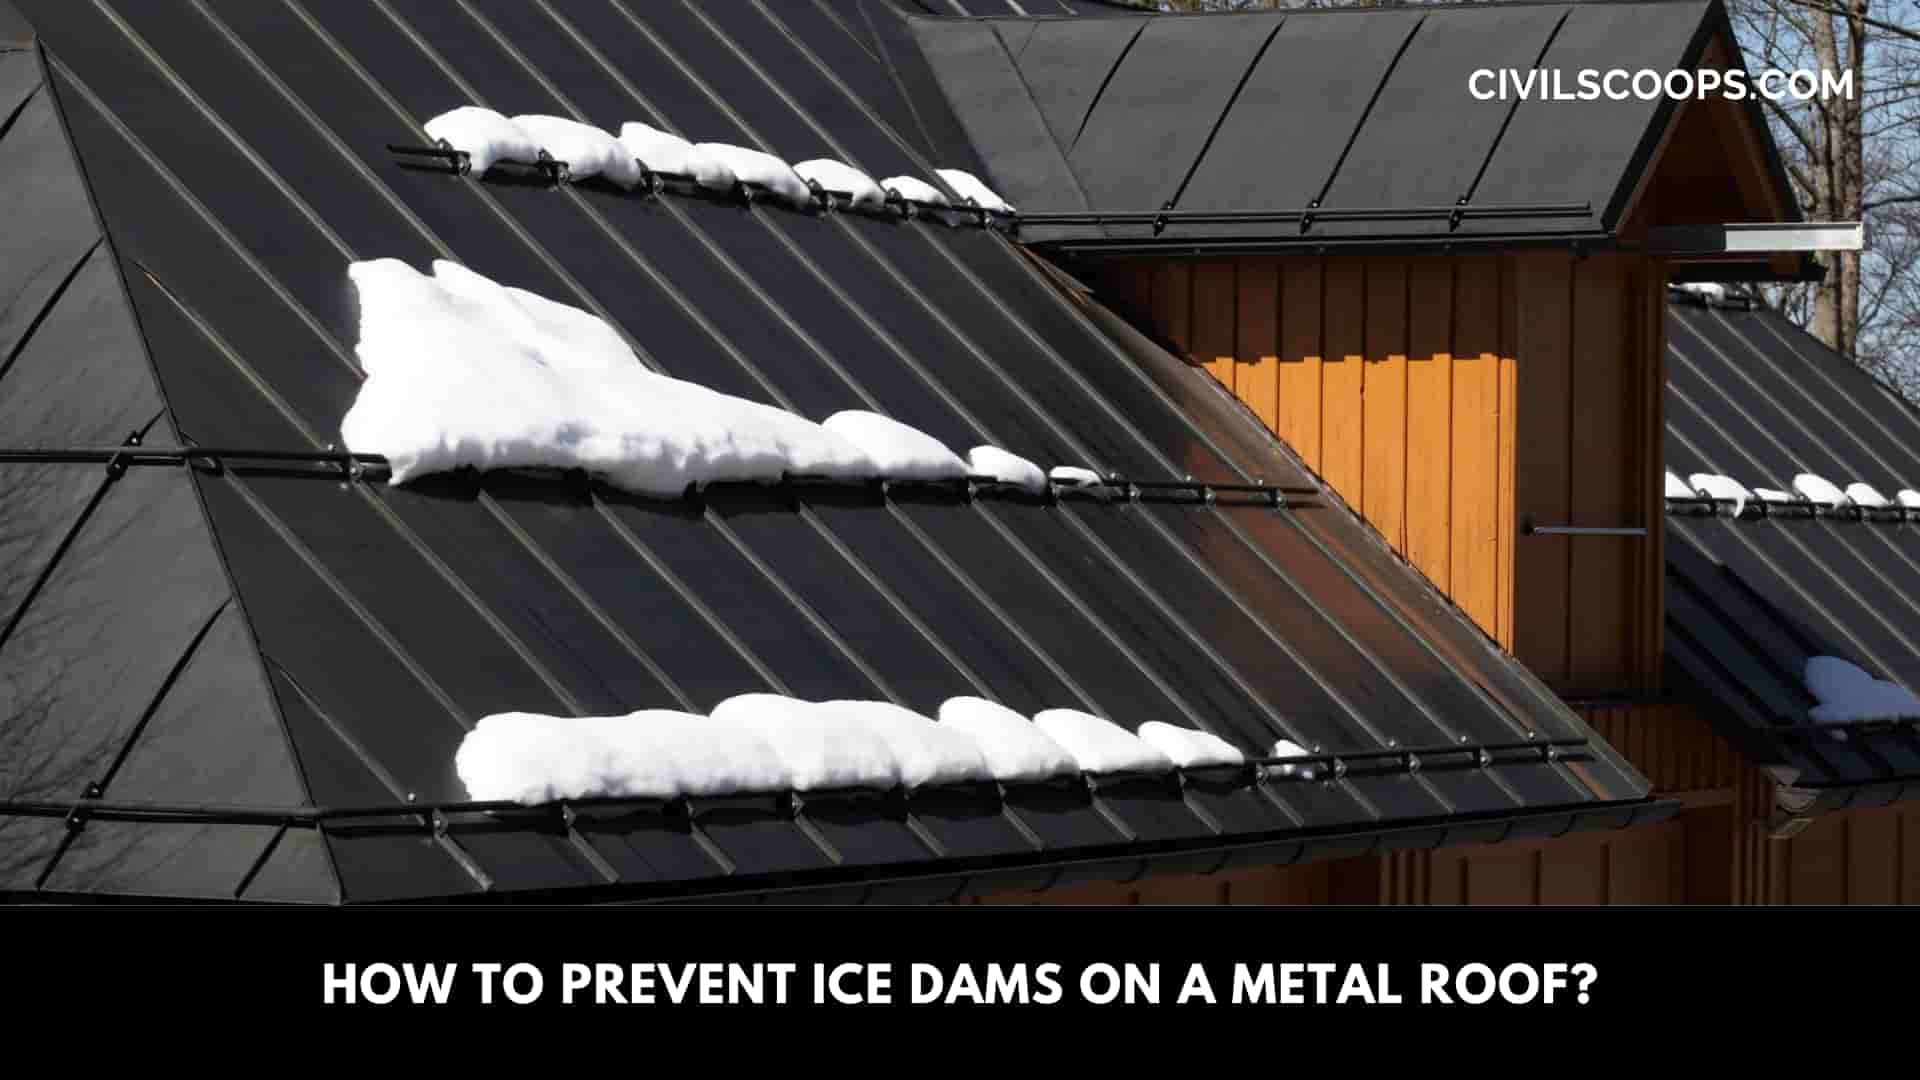 How to Prevent Ice Dams on a Metal Roof?